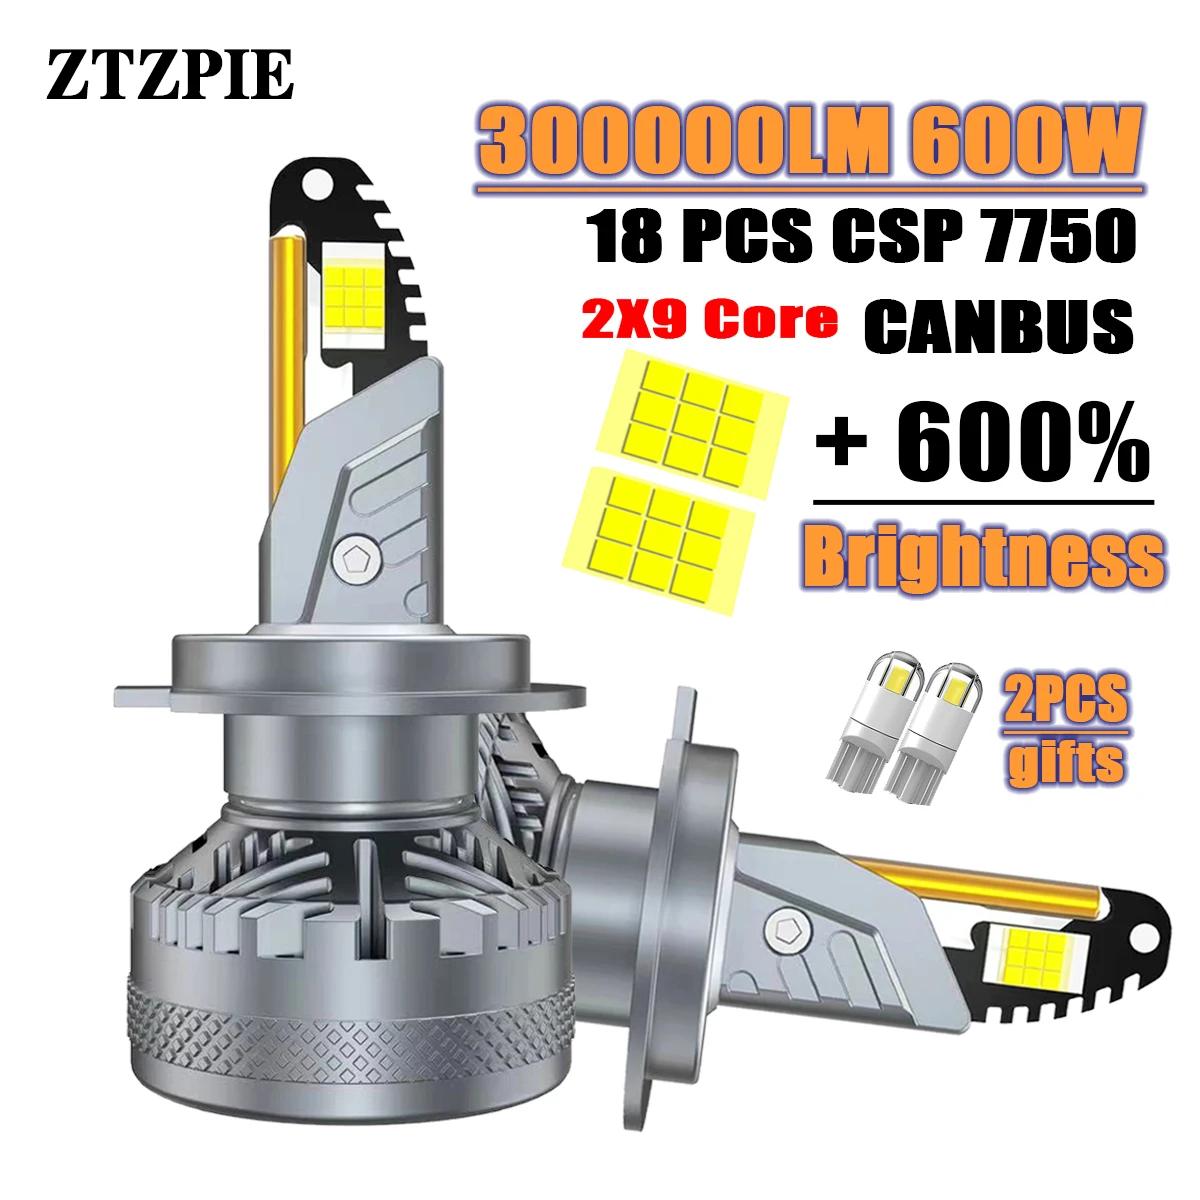 ZTZPIE LED  CSP 7750  ڵ Ʈ Ȱ, 6000K HB3 HB4 9005 9006 H1 H7 H4 H11 , 18 ھ 600W 300000LM